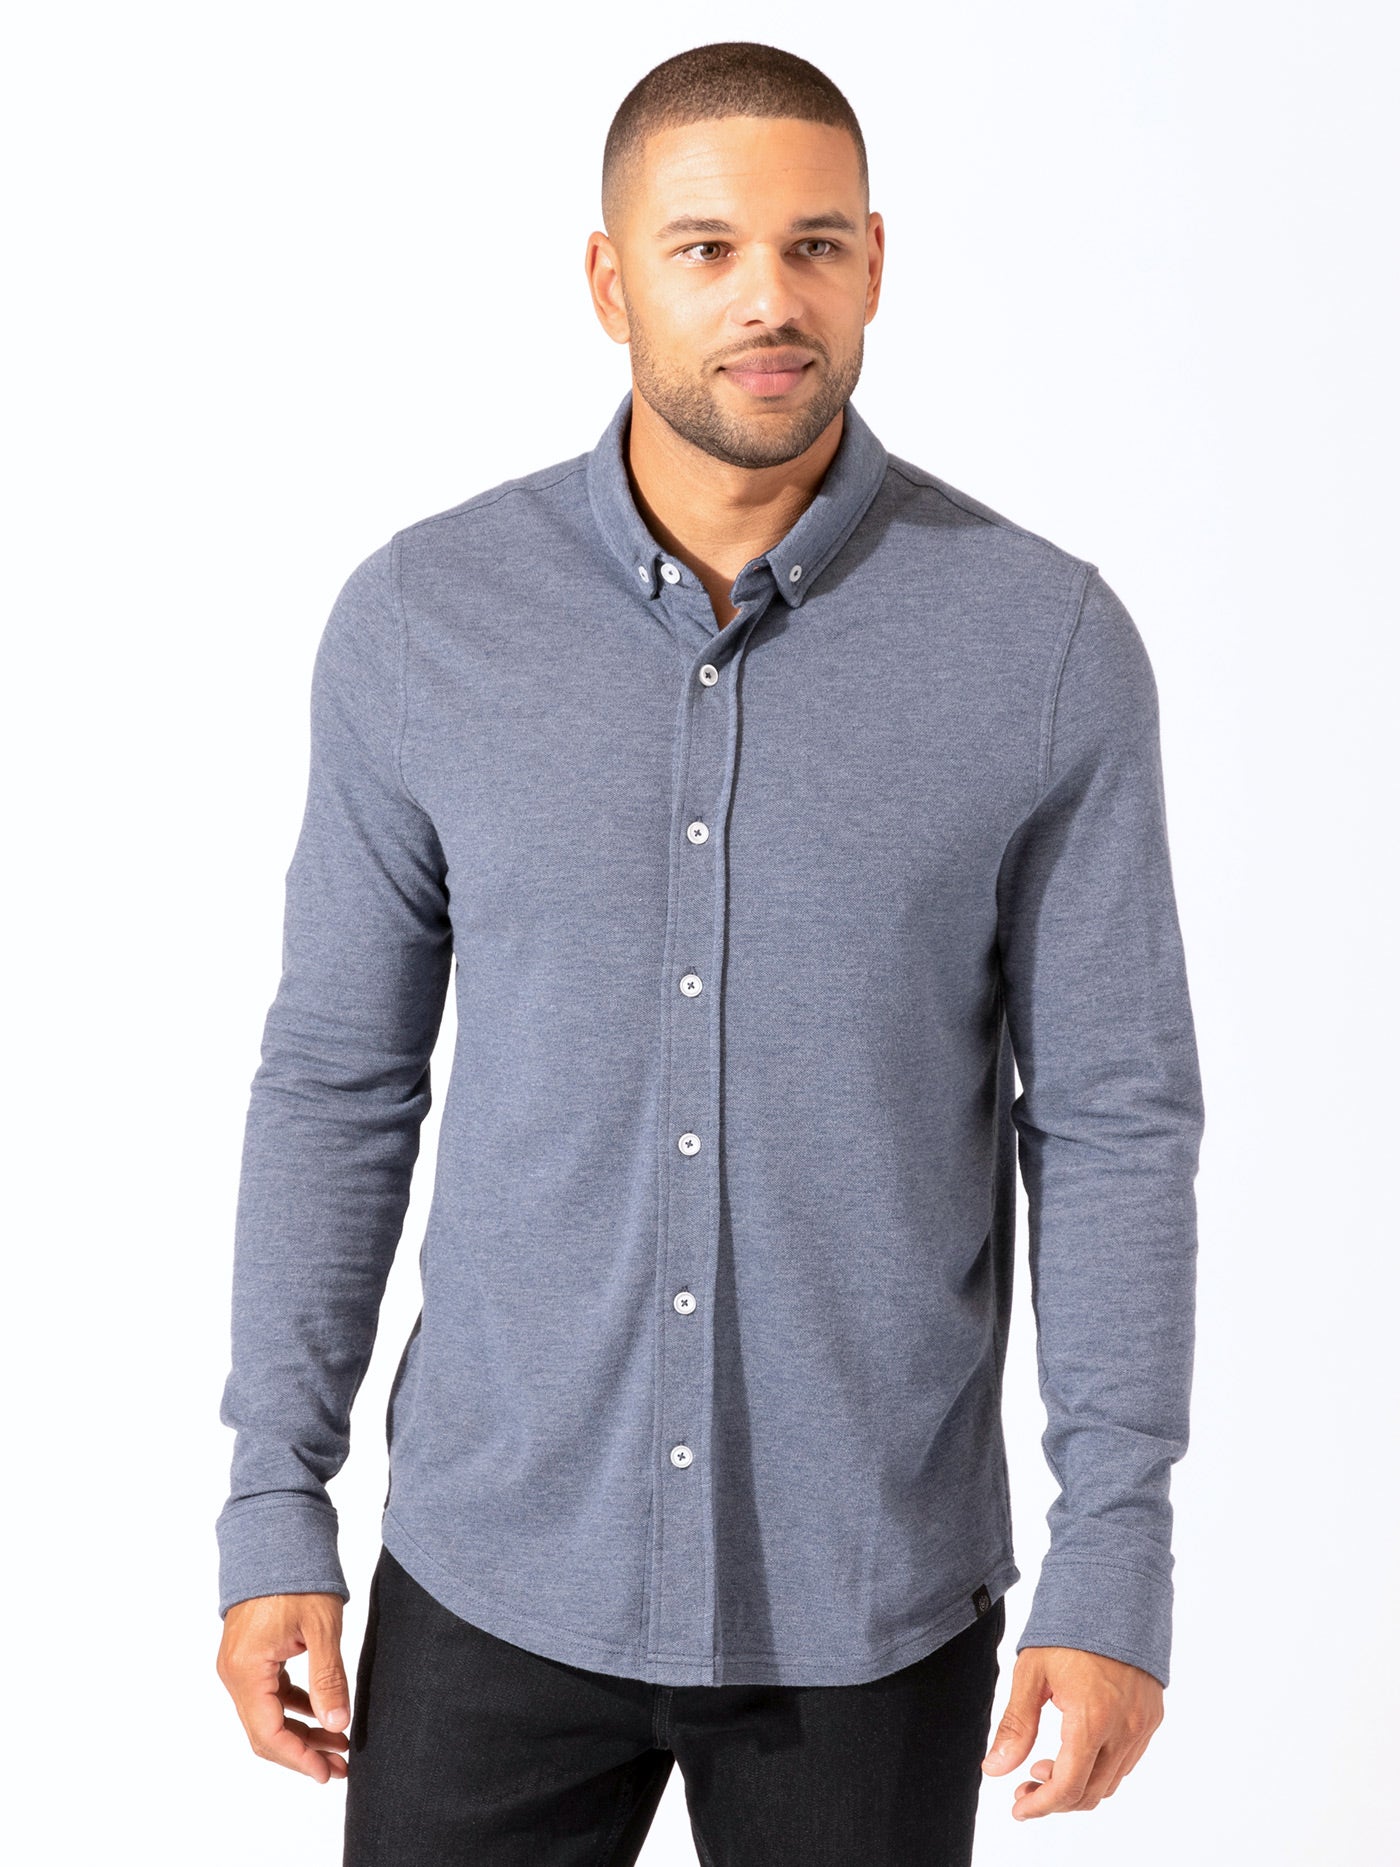 Men's Sale Tops – Threads 4 Thought